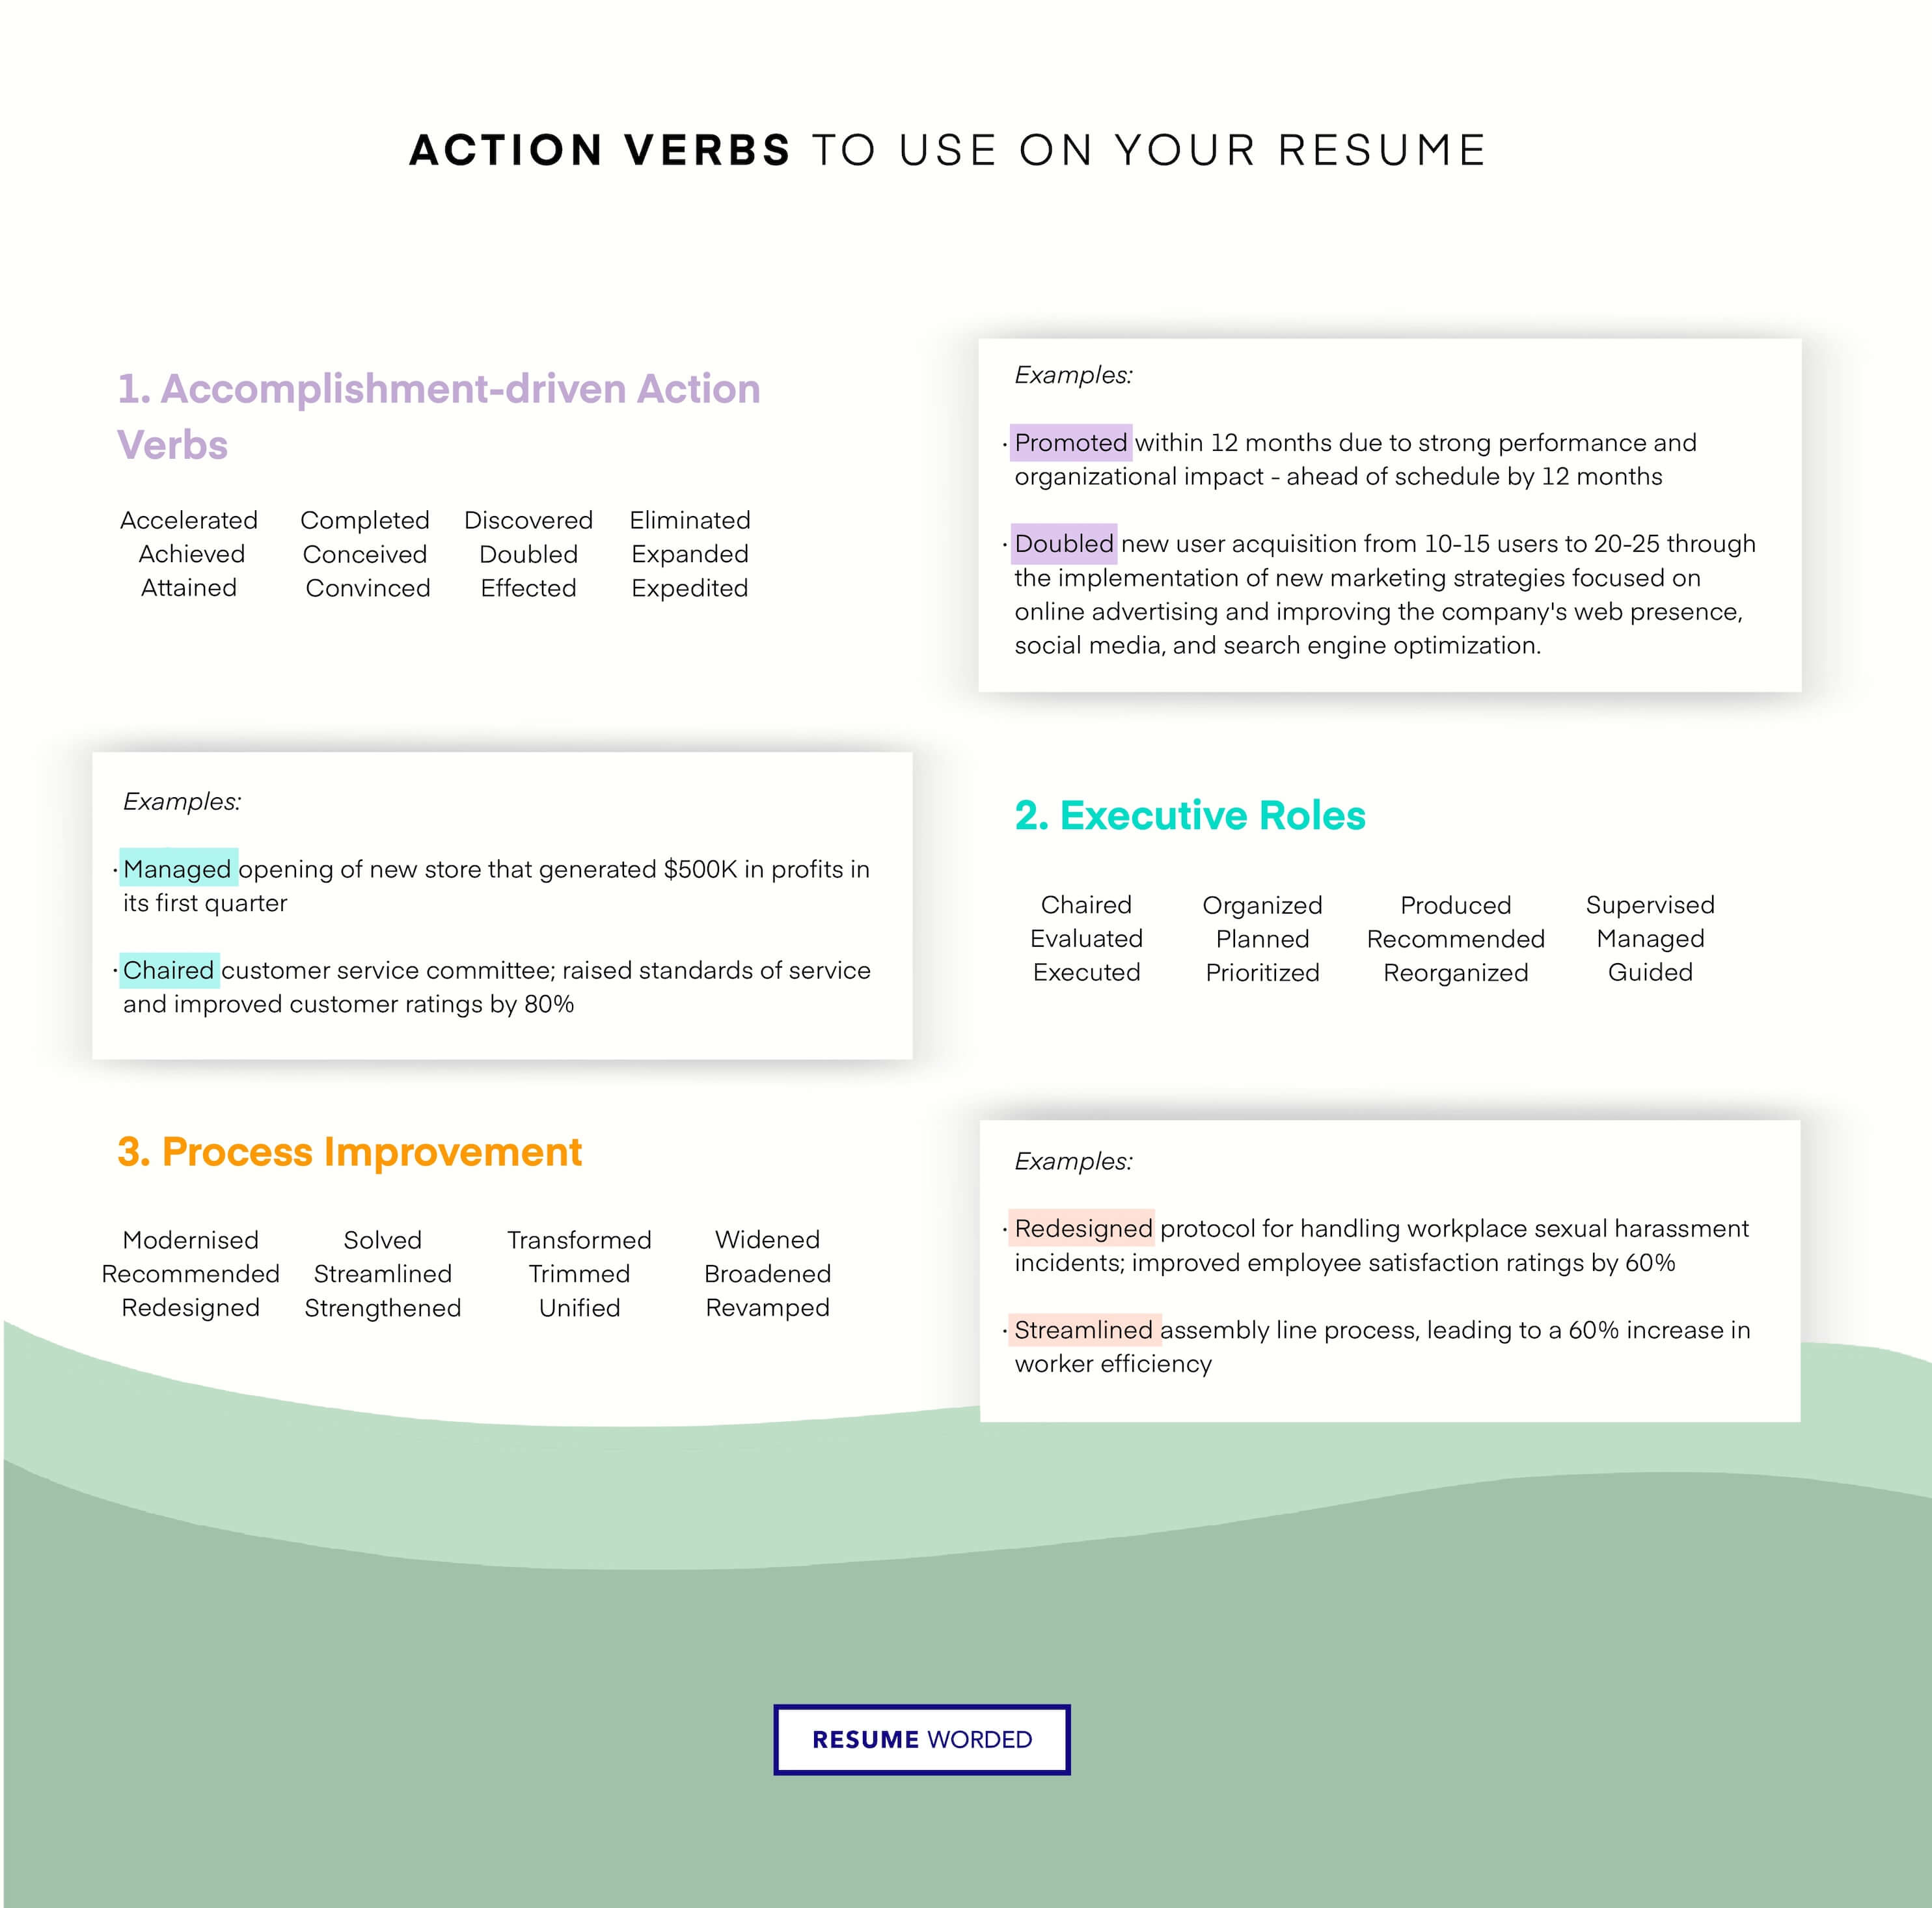 Use the [Action Verb] + [Task] + [Metric] to format your bullet points